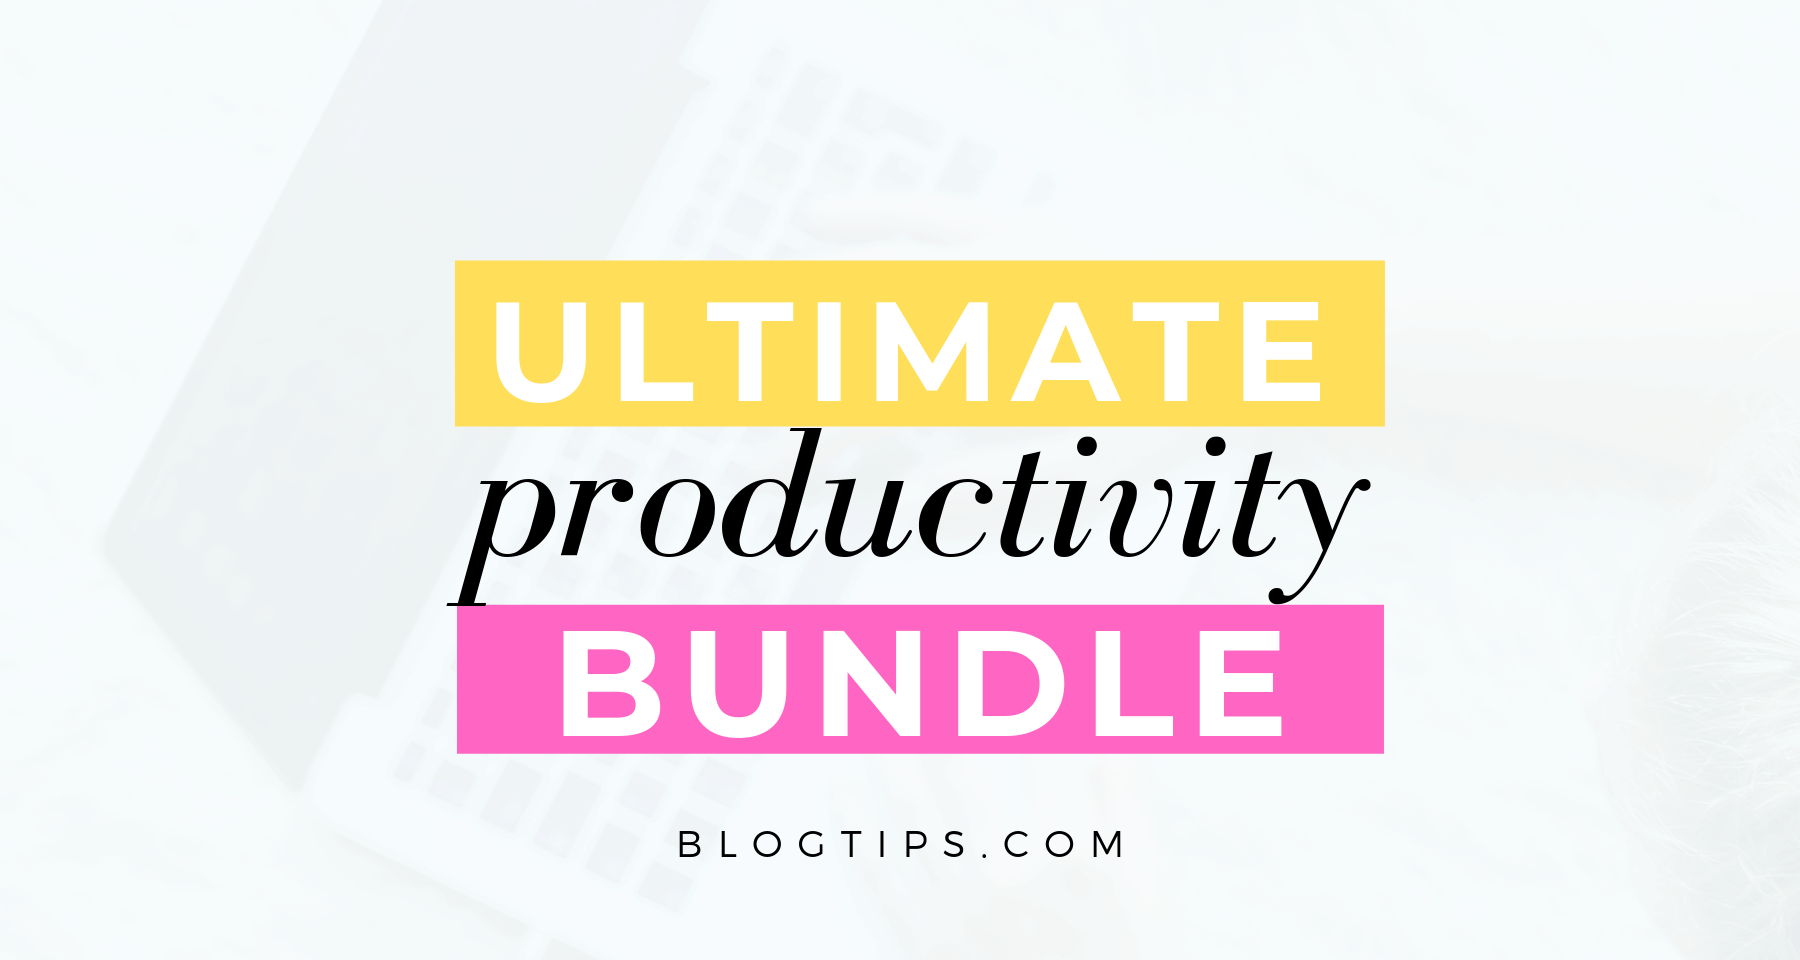 What’s Inside The Ultimate Productivity Bundle 2020